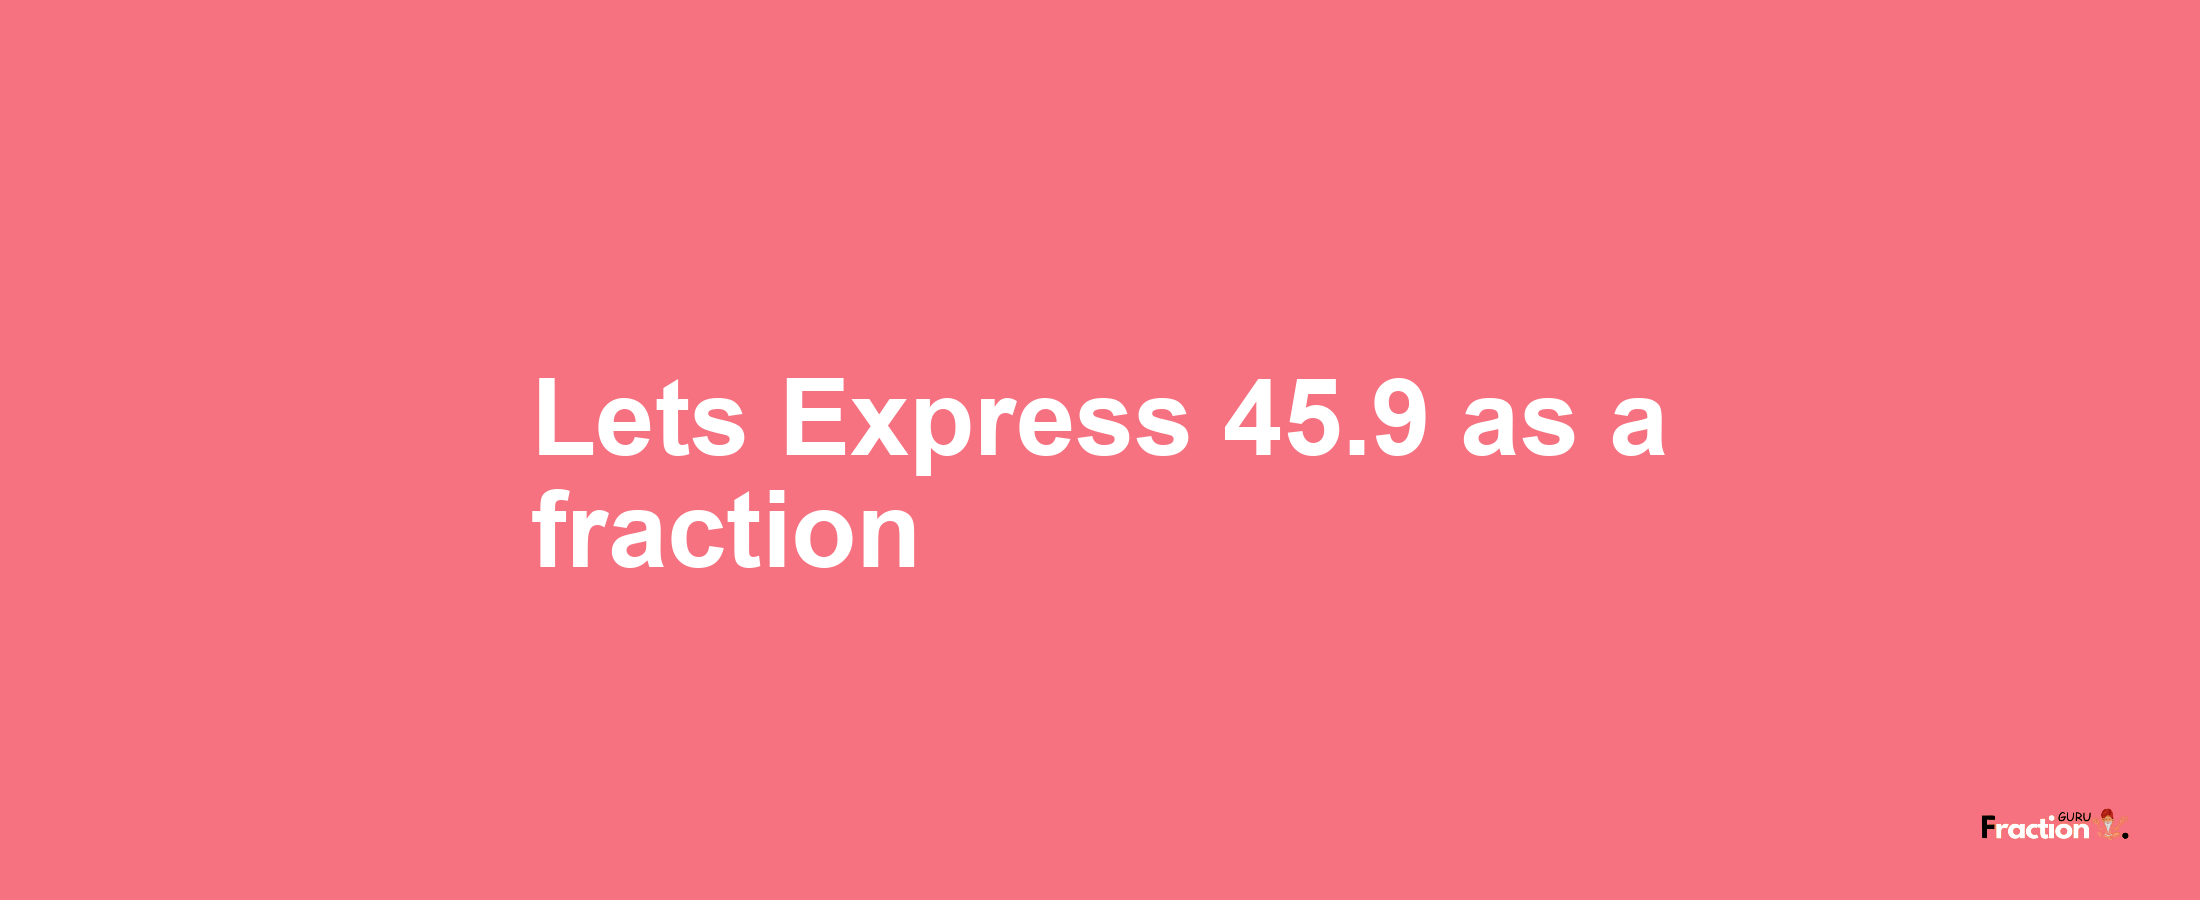 Lets Express 45.9 as afraction